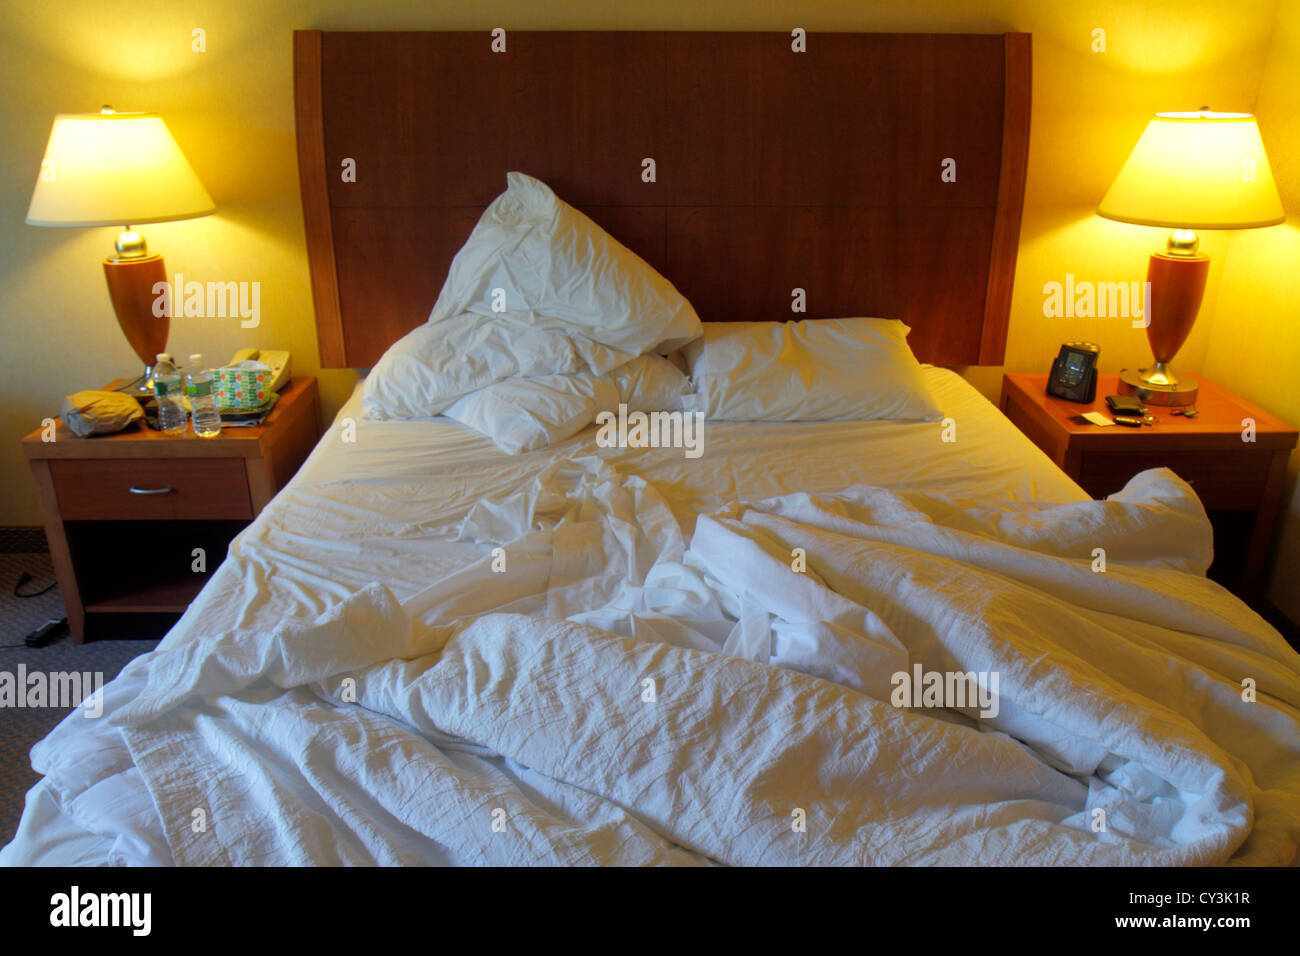 Maine,Northeast,New England,Freeport,Hilton Garden Inn,motel,hotel hotels lodging inn motel motels,guest room,queen size bed,unmade,pillows,lamps,tabl Stock Photo